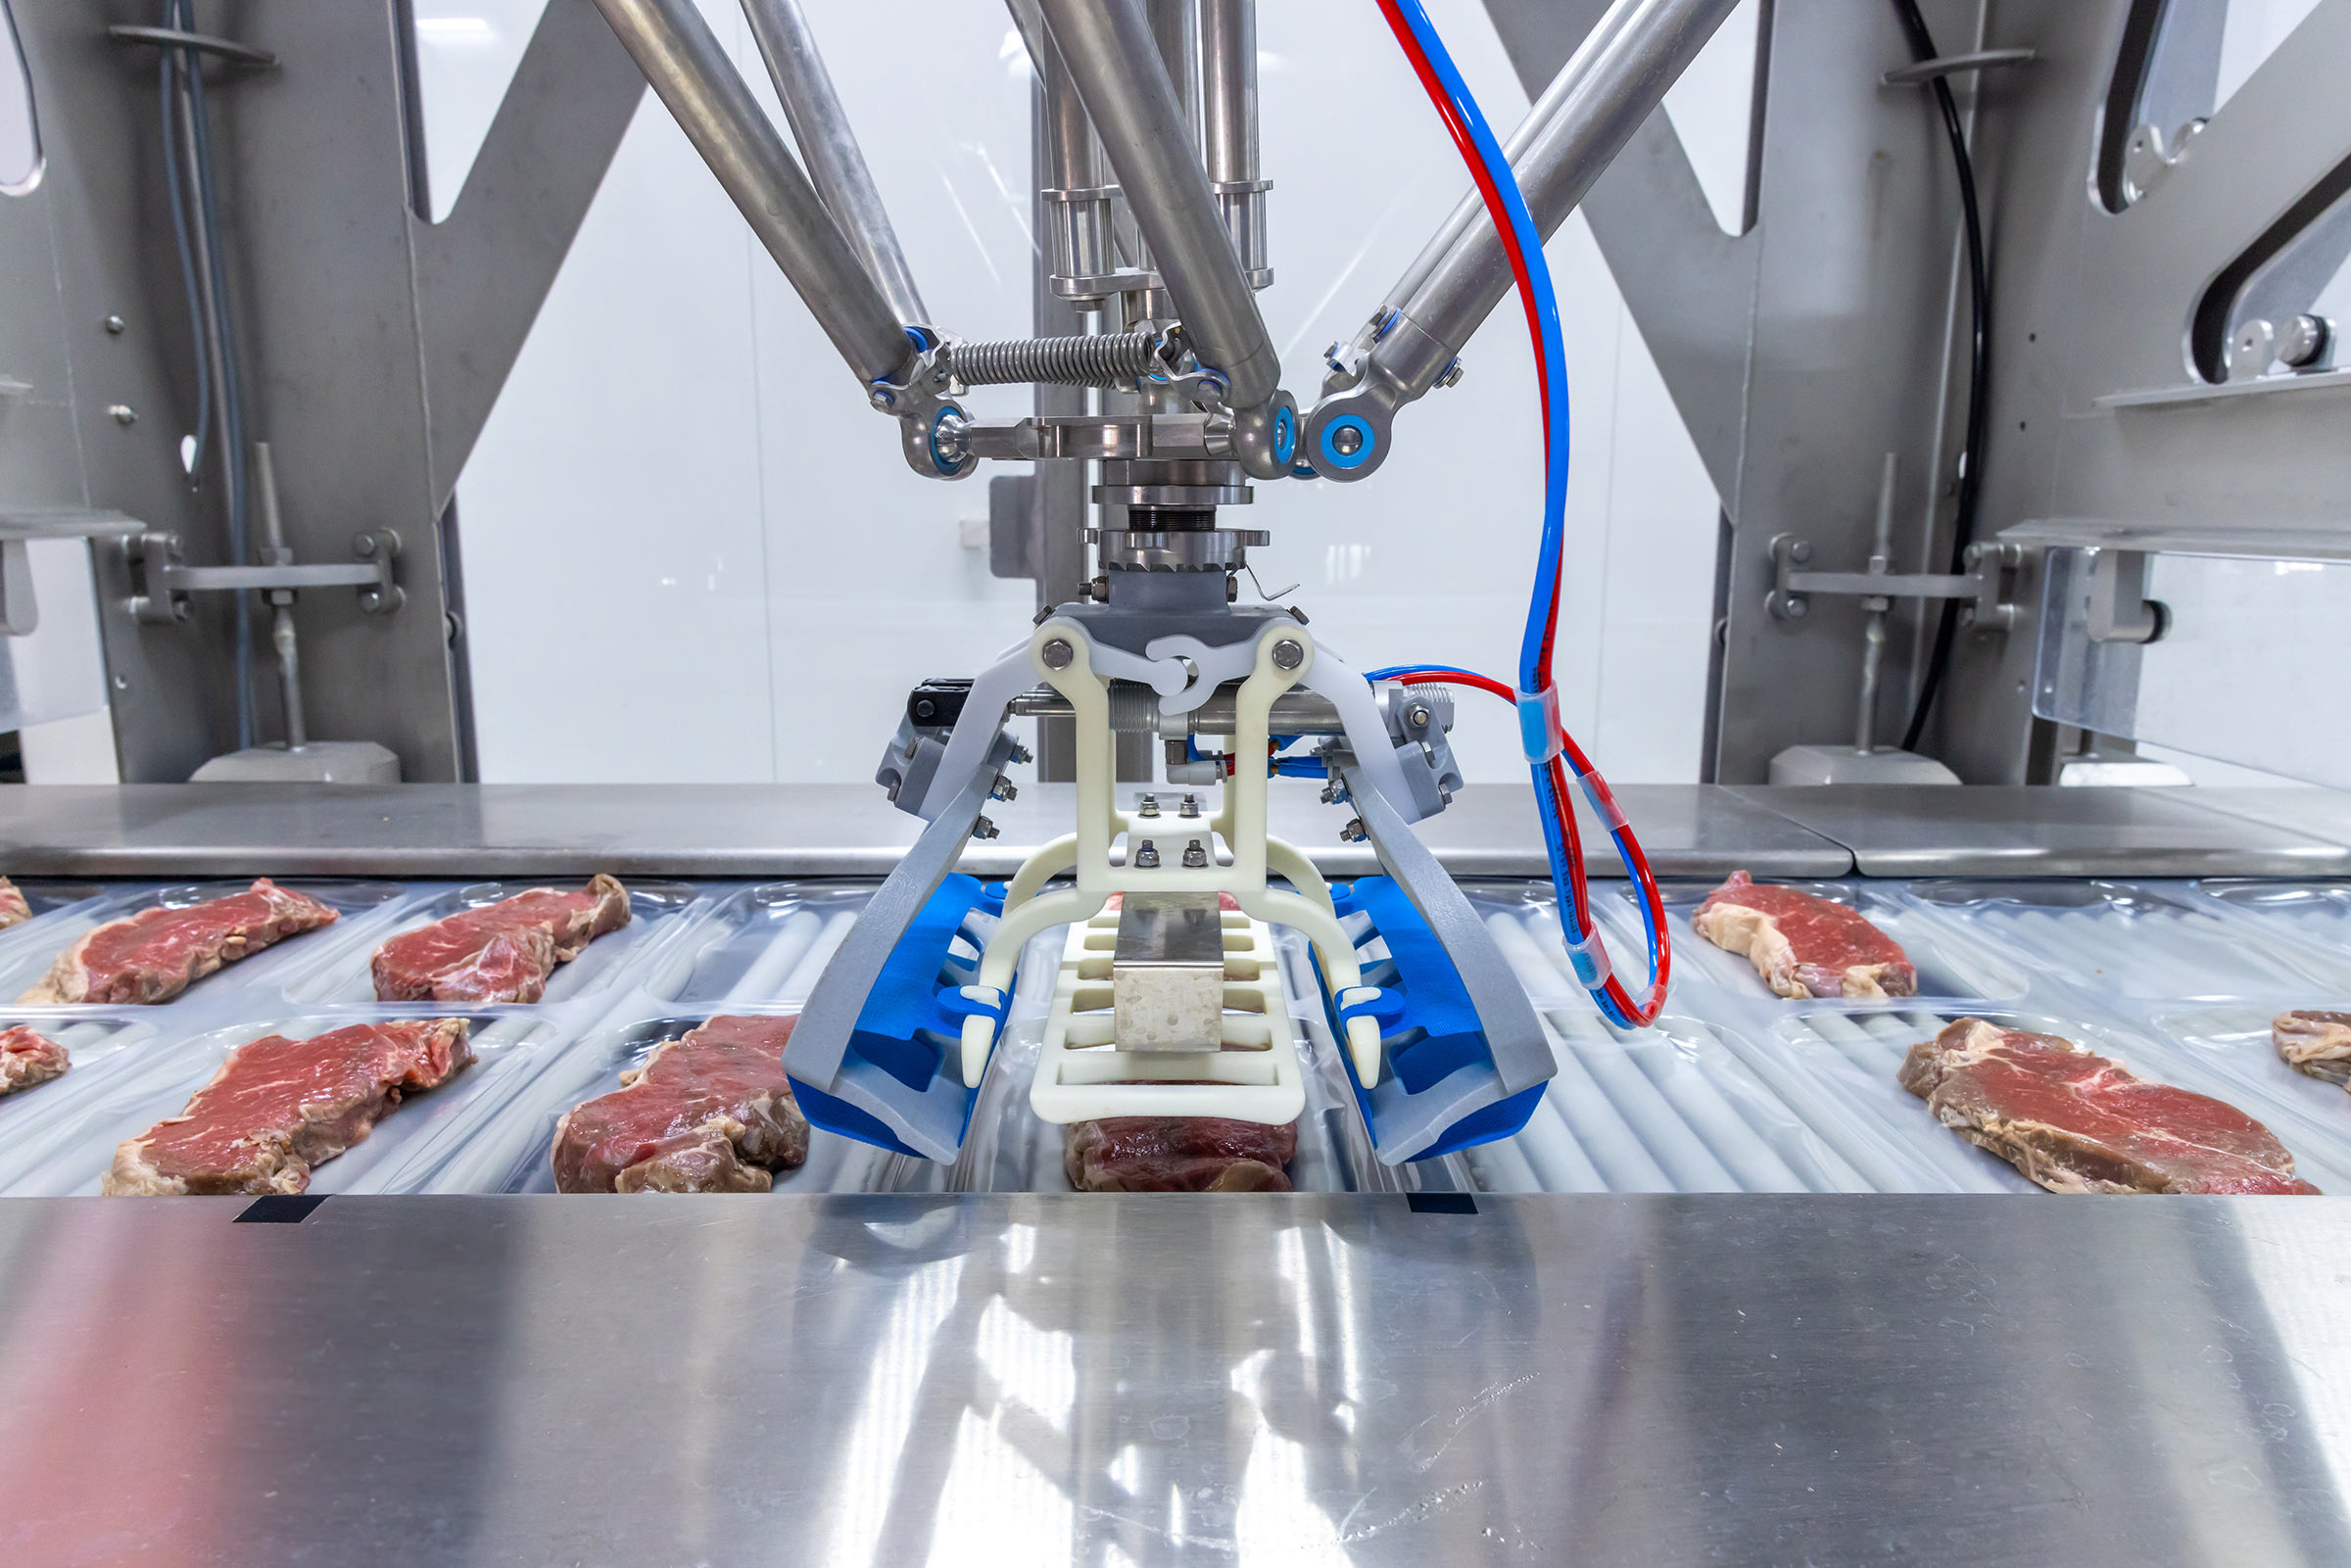 RoboBatcher robotic arm gently picking up two prestyled boneless pork fillets to place into thermoformer pack with consistent and precise alignment